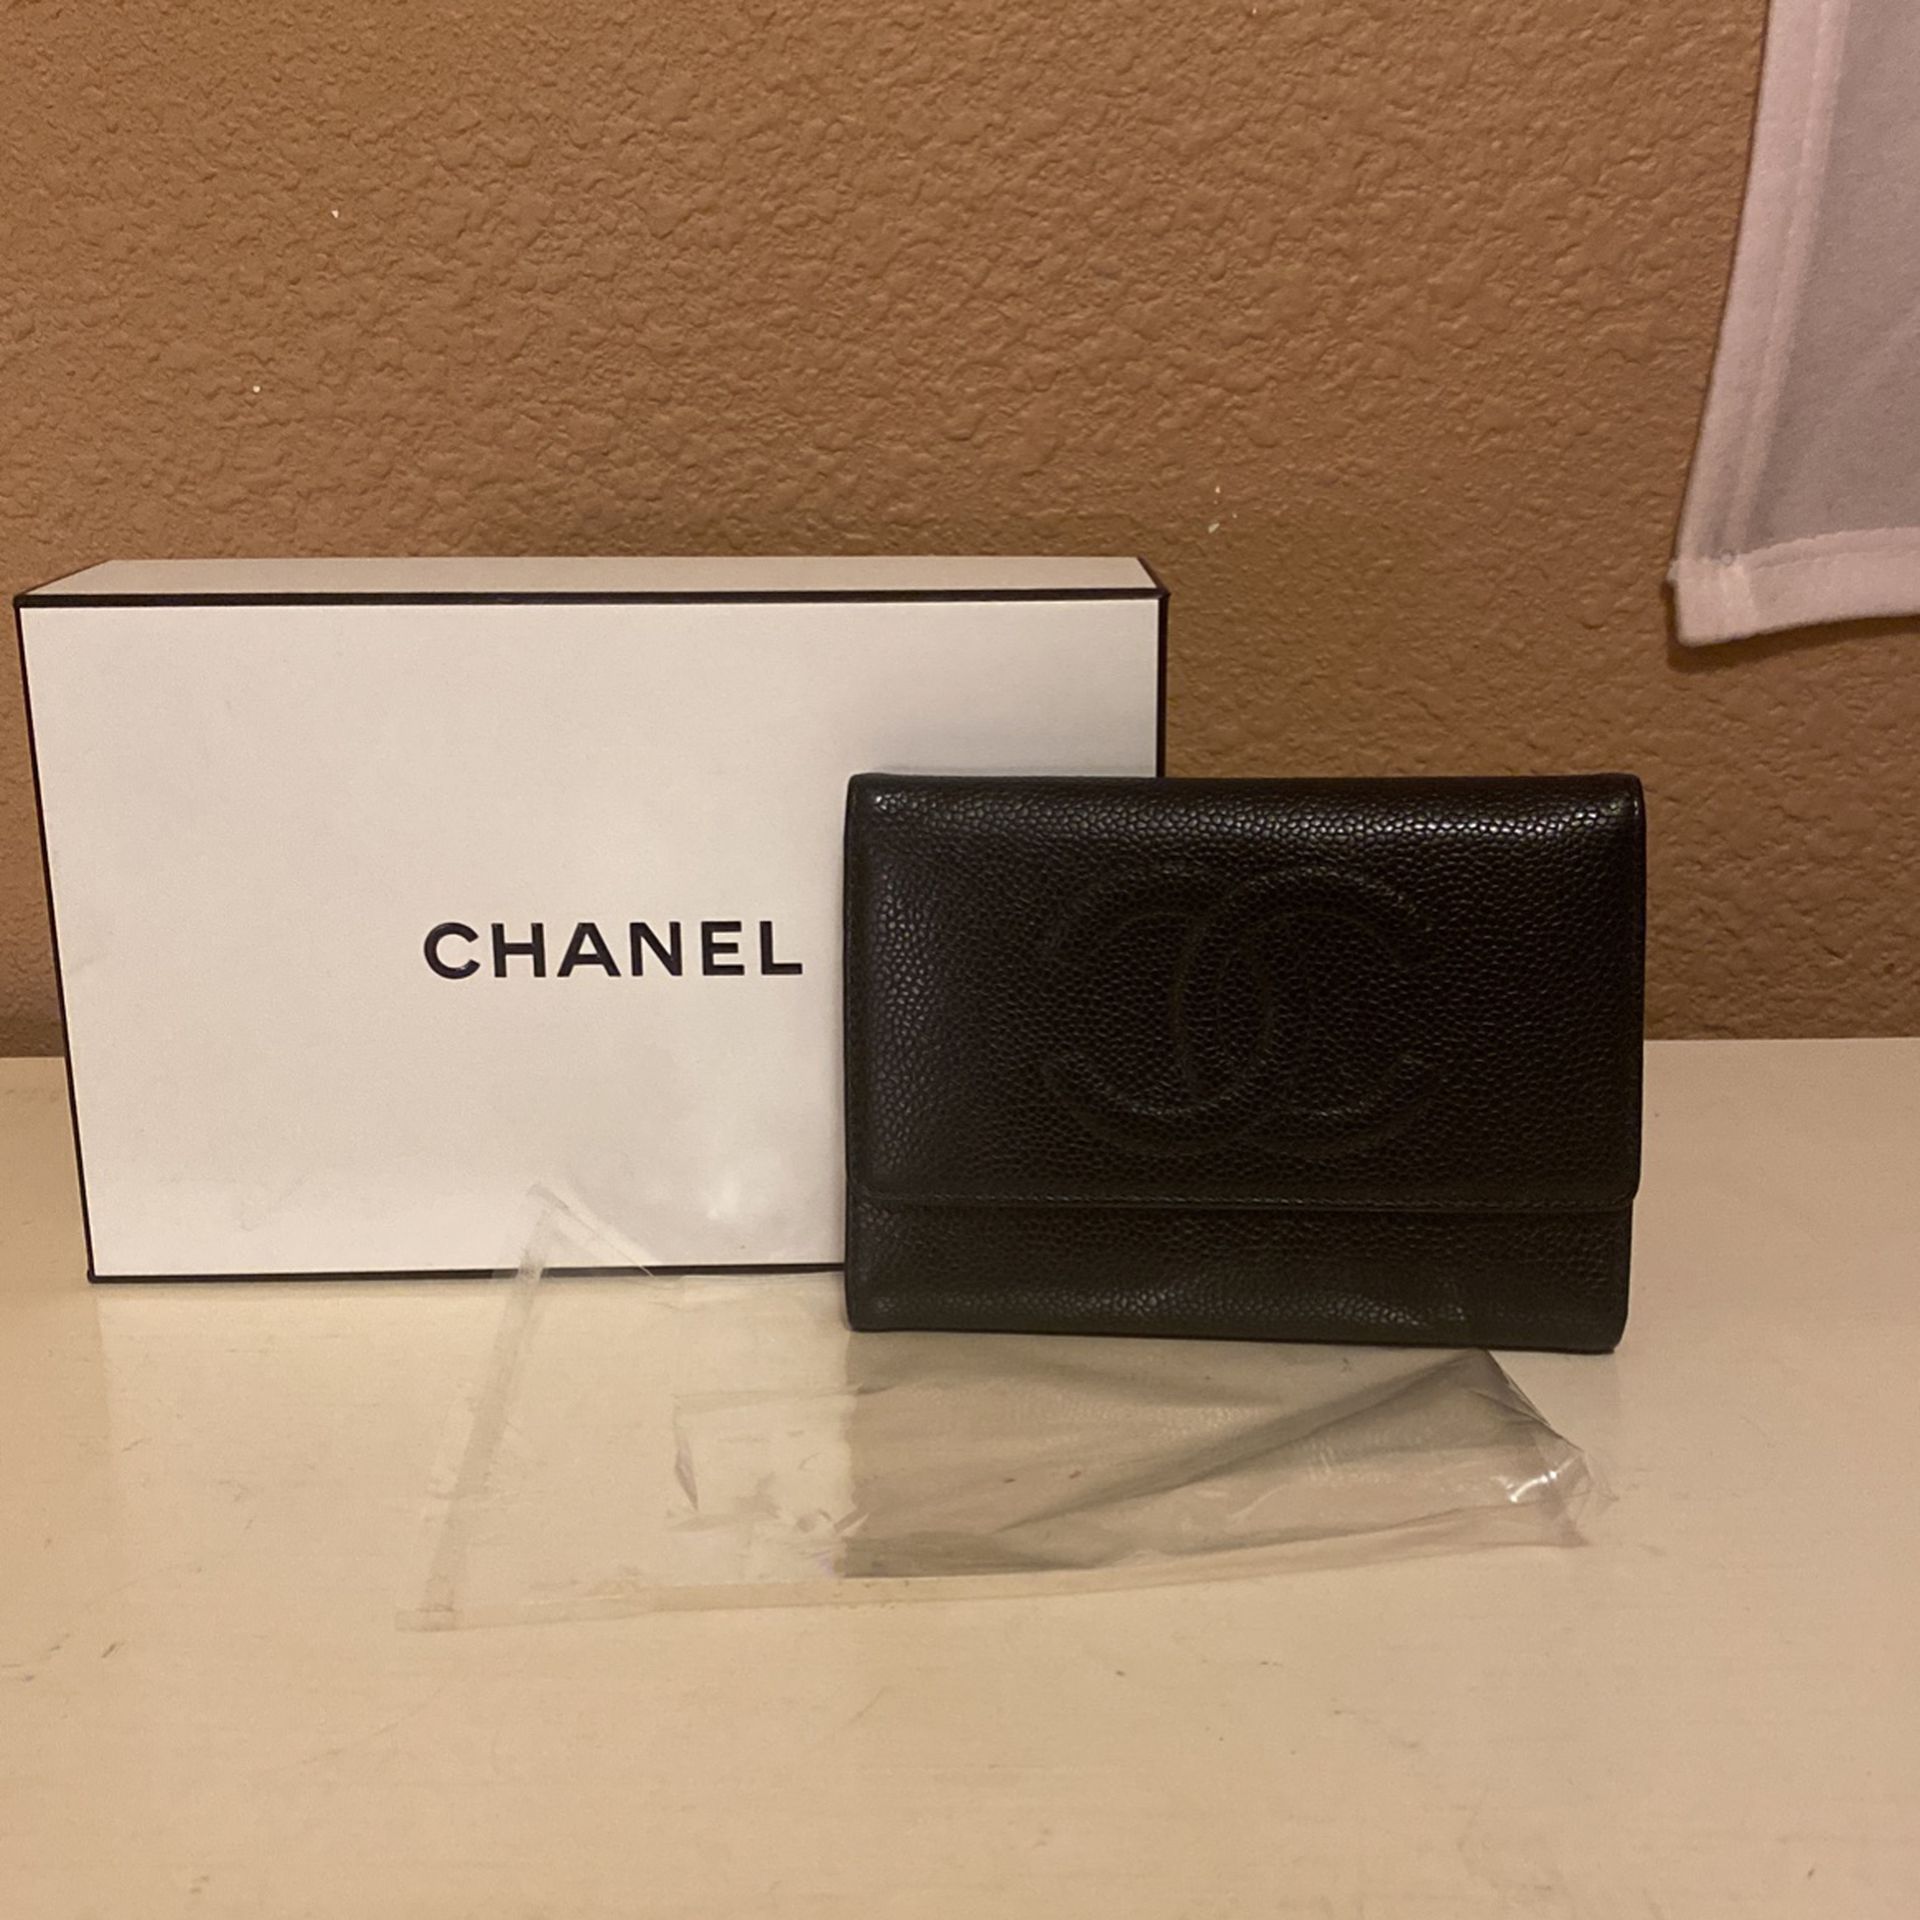 Chanel New Womens Authentic  Cc Logo Black Caviar Skin Bifold Wallet With Serial Number Seal $300 Obo C My Other Chanel Authentic Items Ty